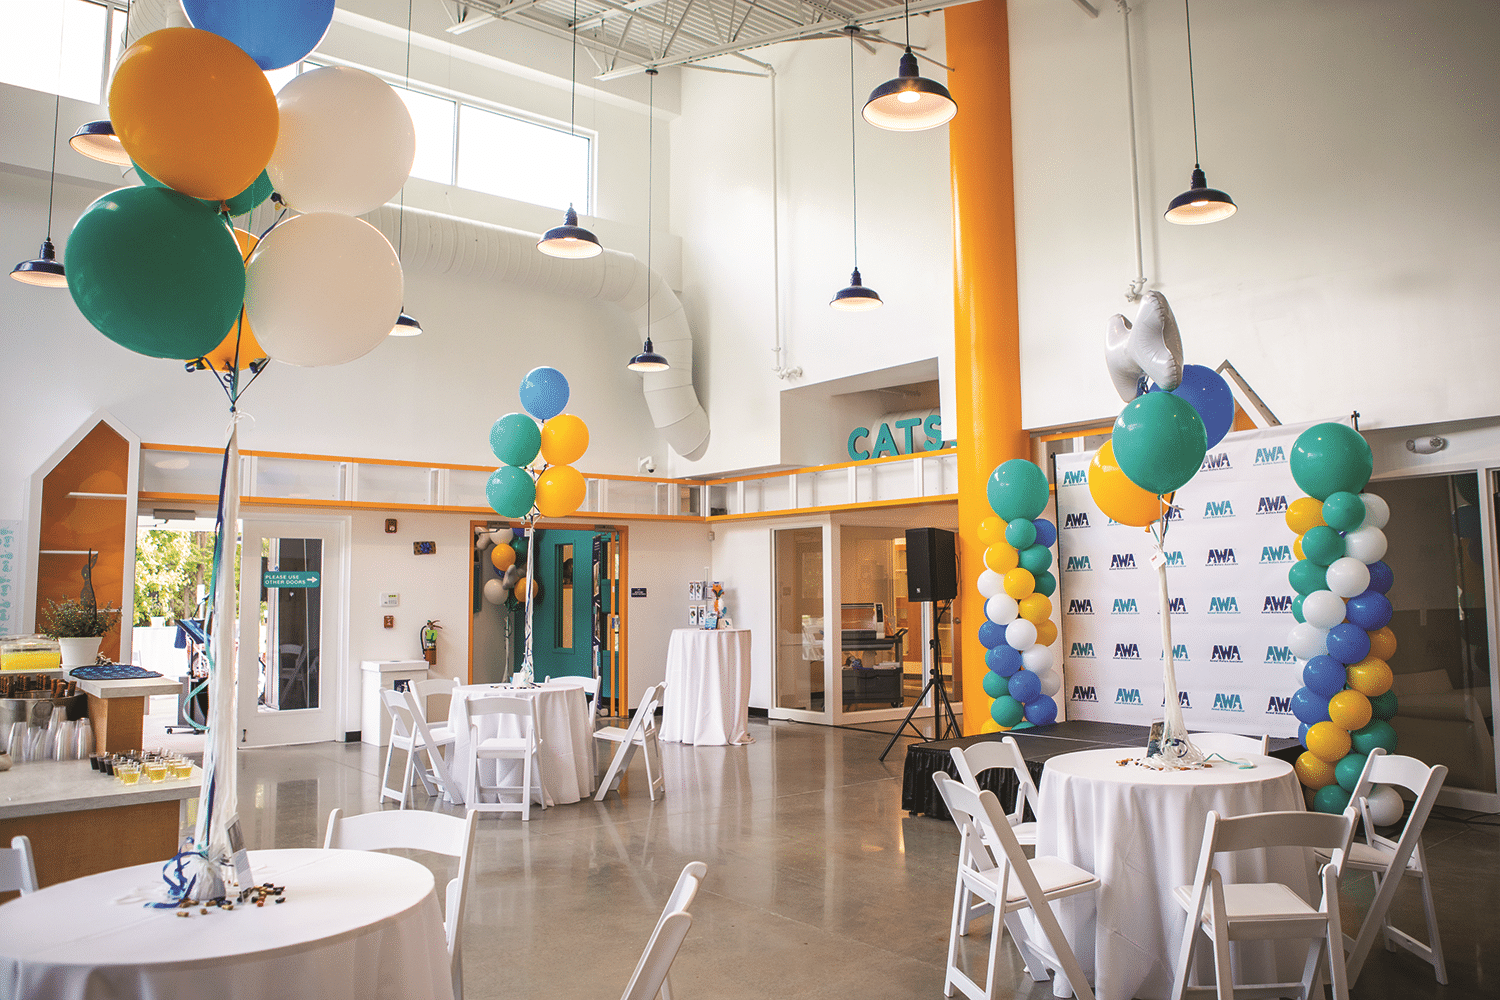 Animal Welfare Association lobby decorated with charis, tables and balloons for party and event rental.